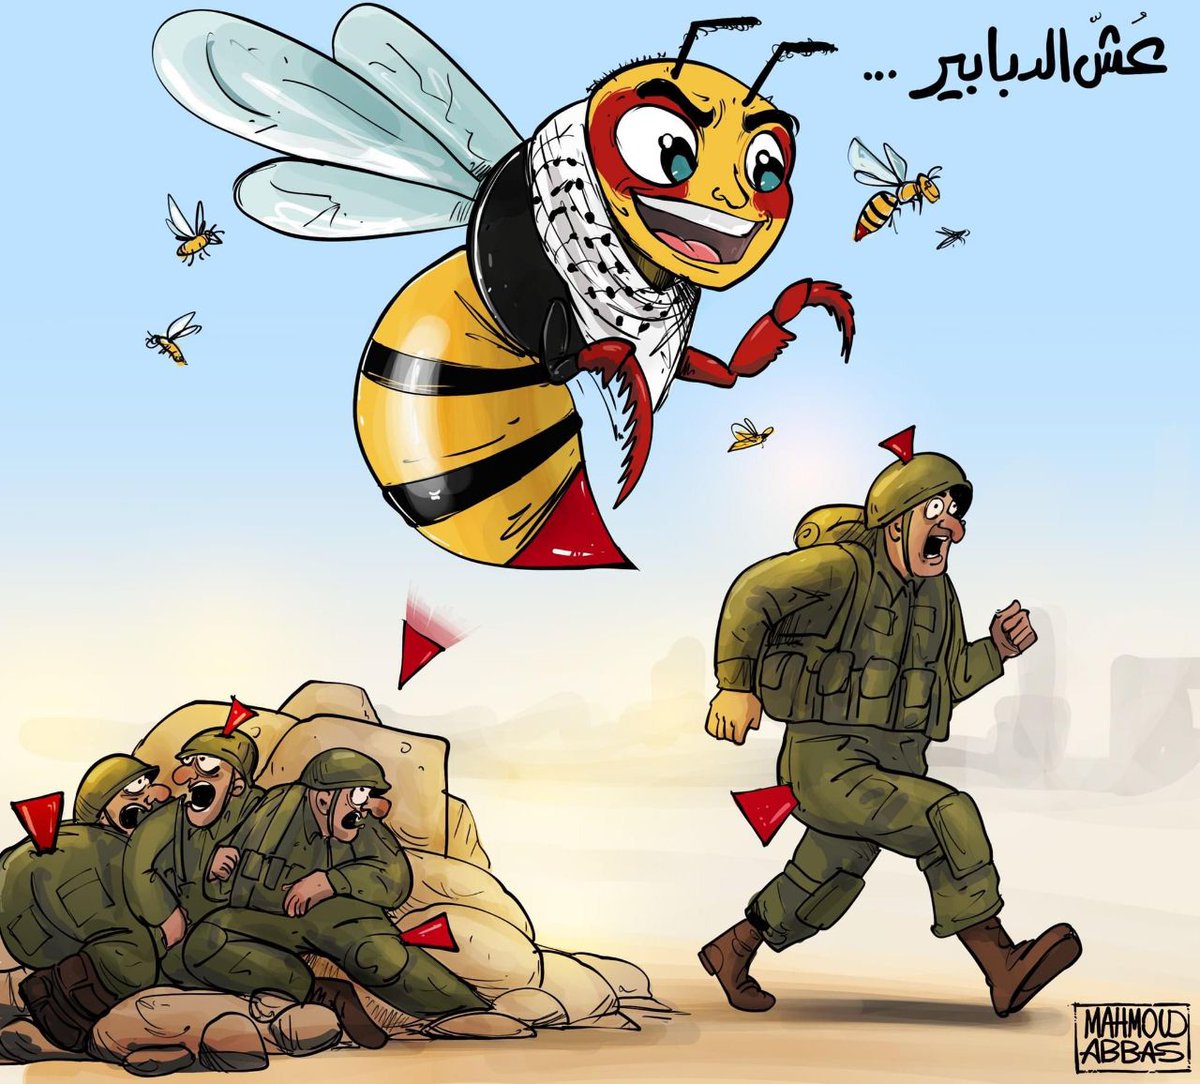 Cartoonist Mahmoud Abbas has released the following caricature commenting on the injury of 12 Israeli occupation soldiers in an attack by hornets in southern Gaza on Friday evening. Dr. Avi Ironi, director of the Israeli Sheba Emergency Medical Center, said, 'I have never seen a…